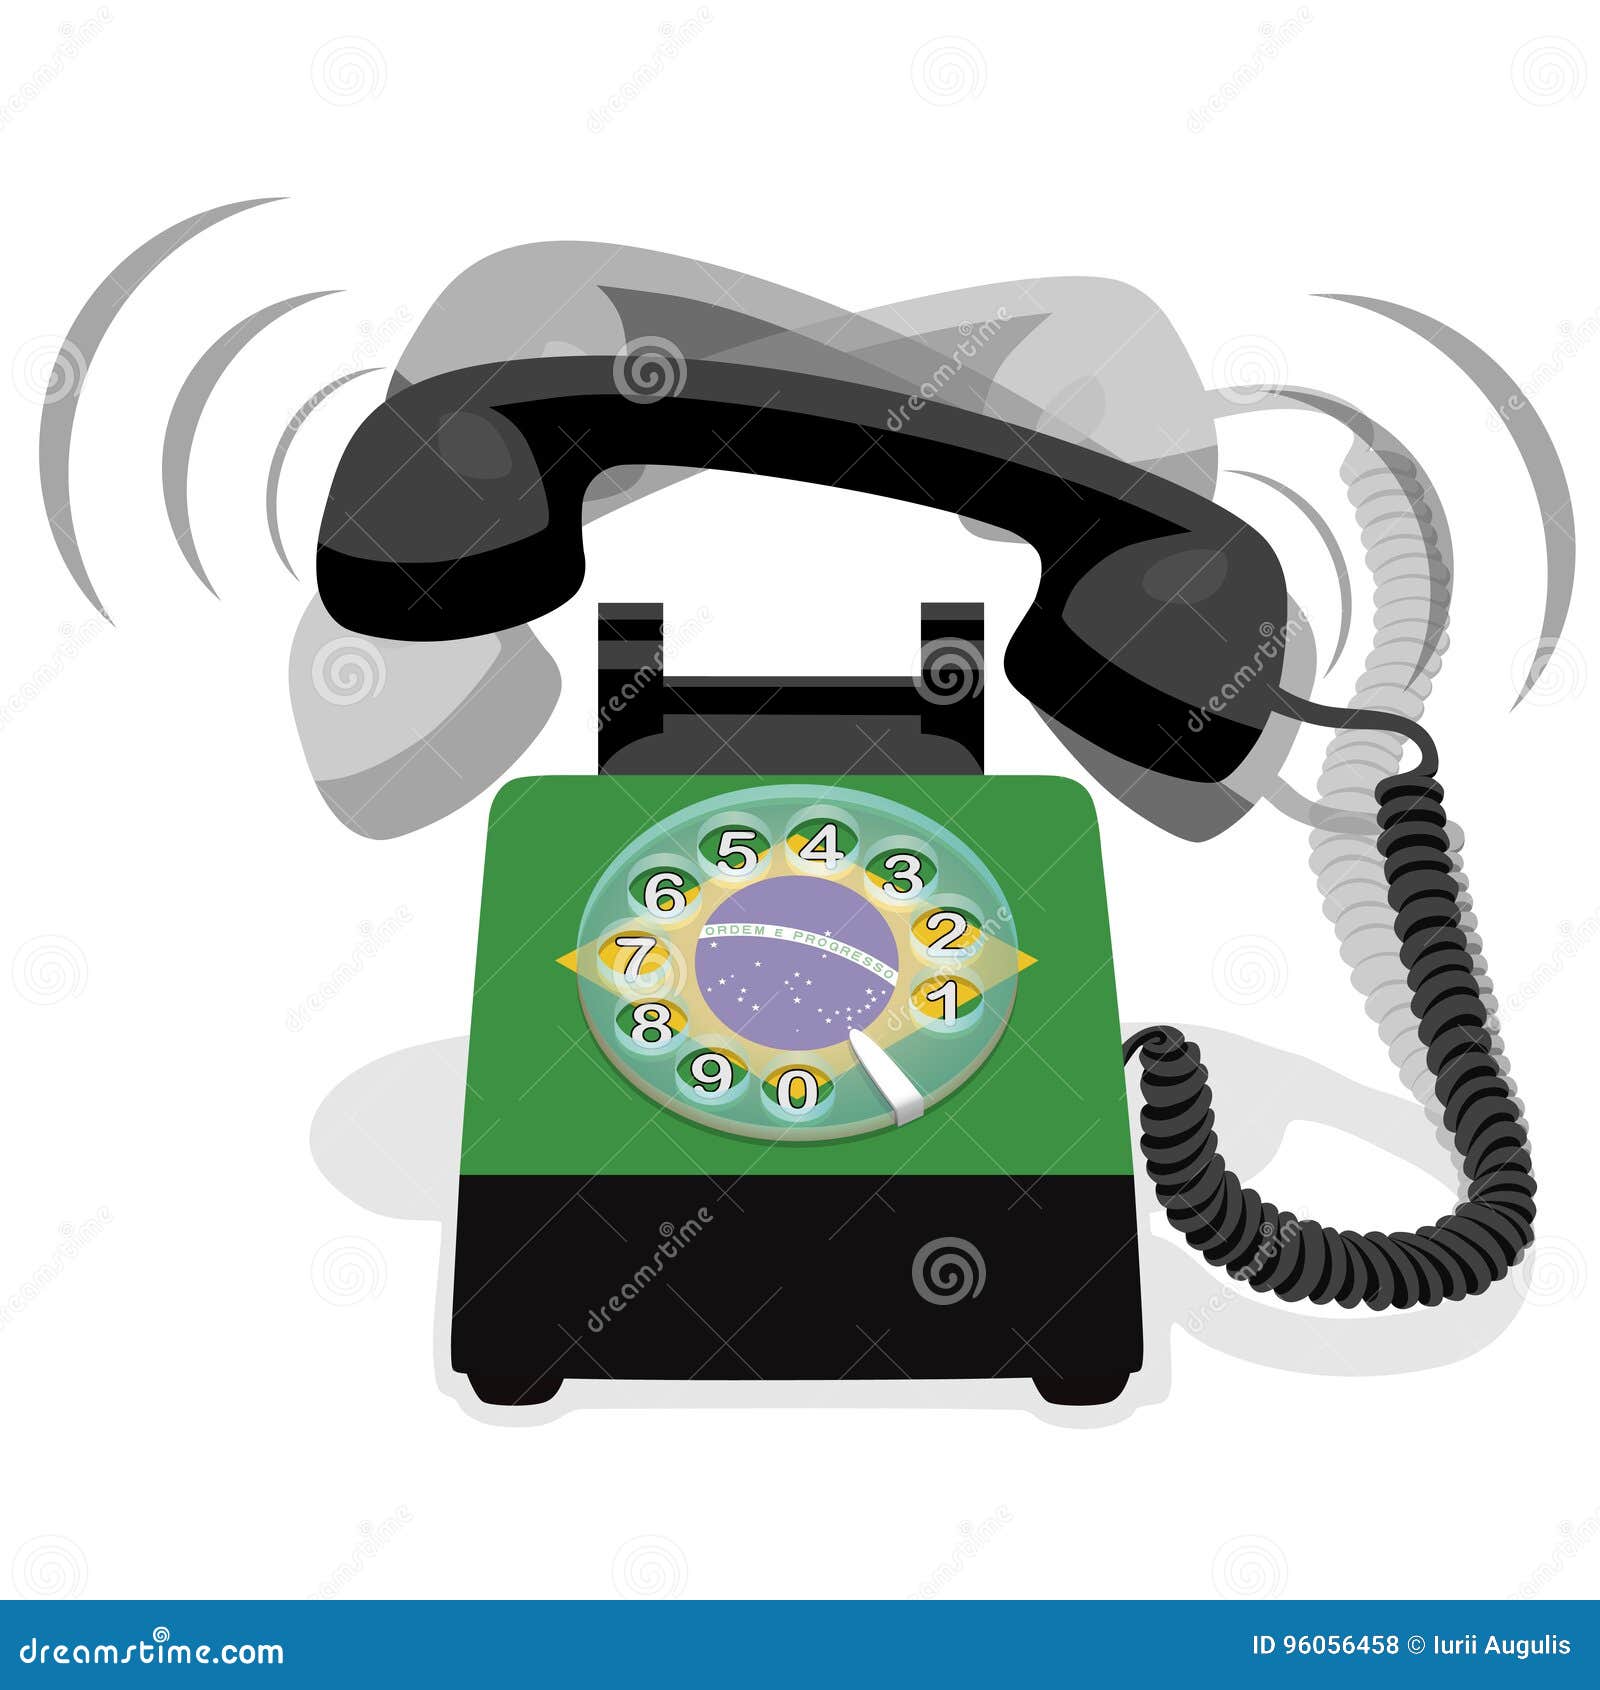 ringing black stationary phone with rotary dial and flag of brazil